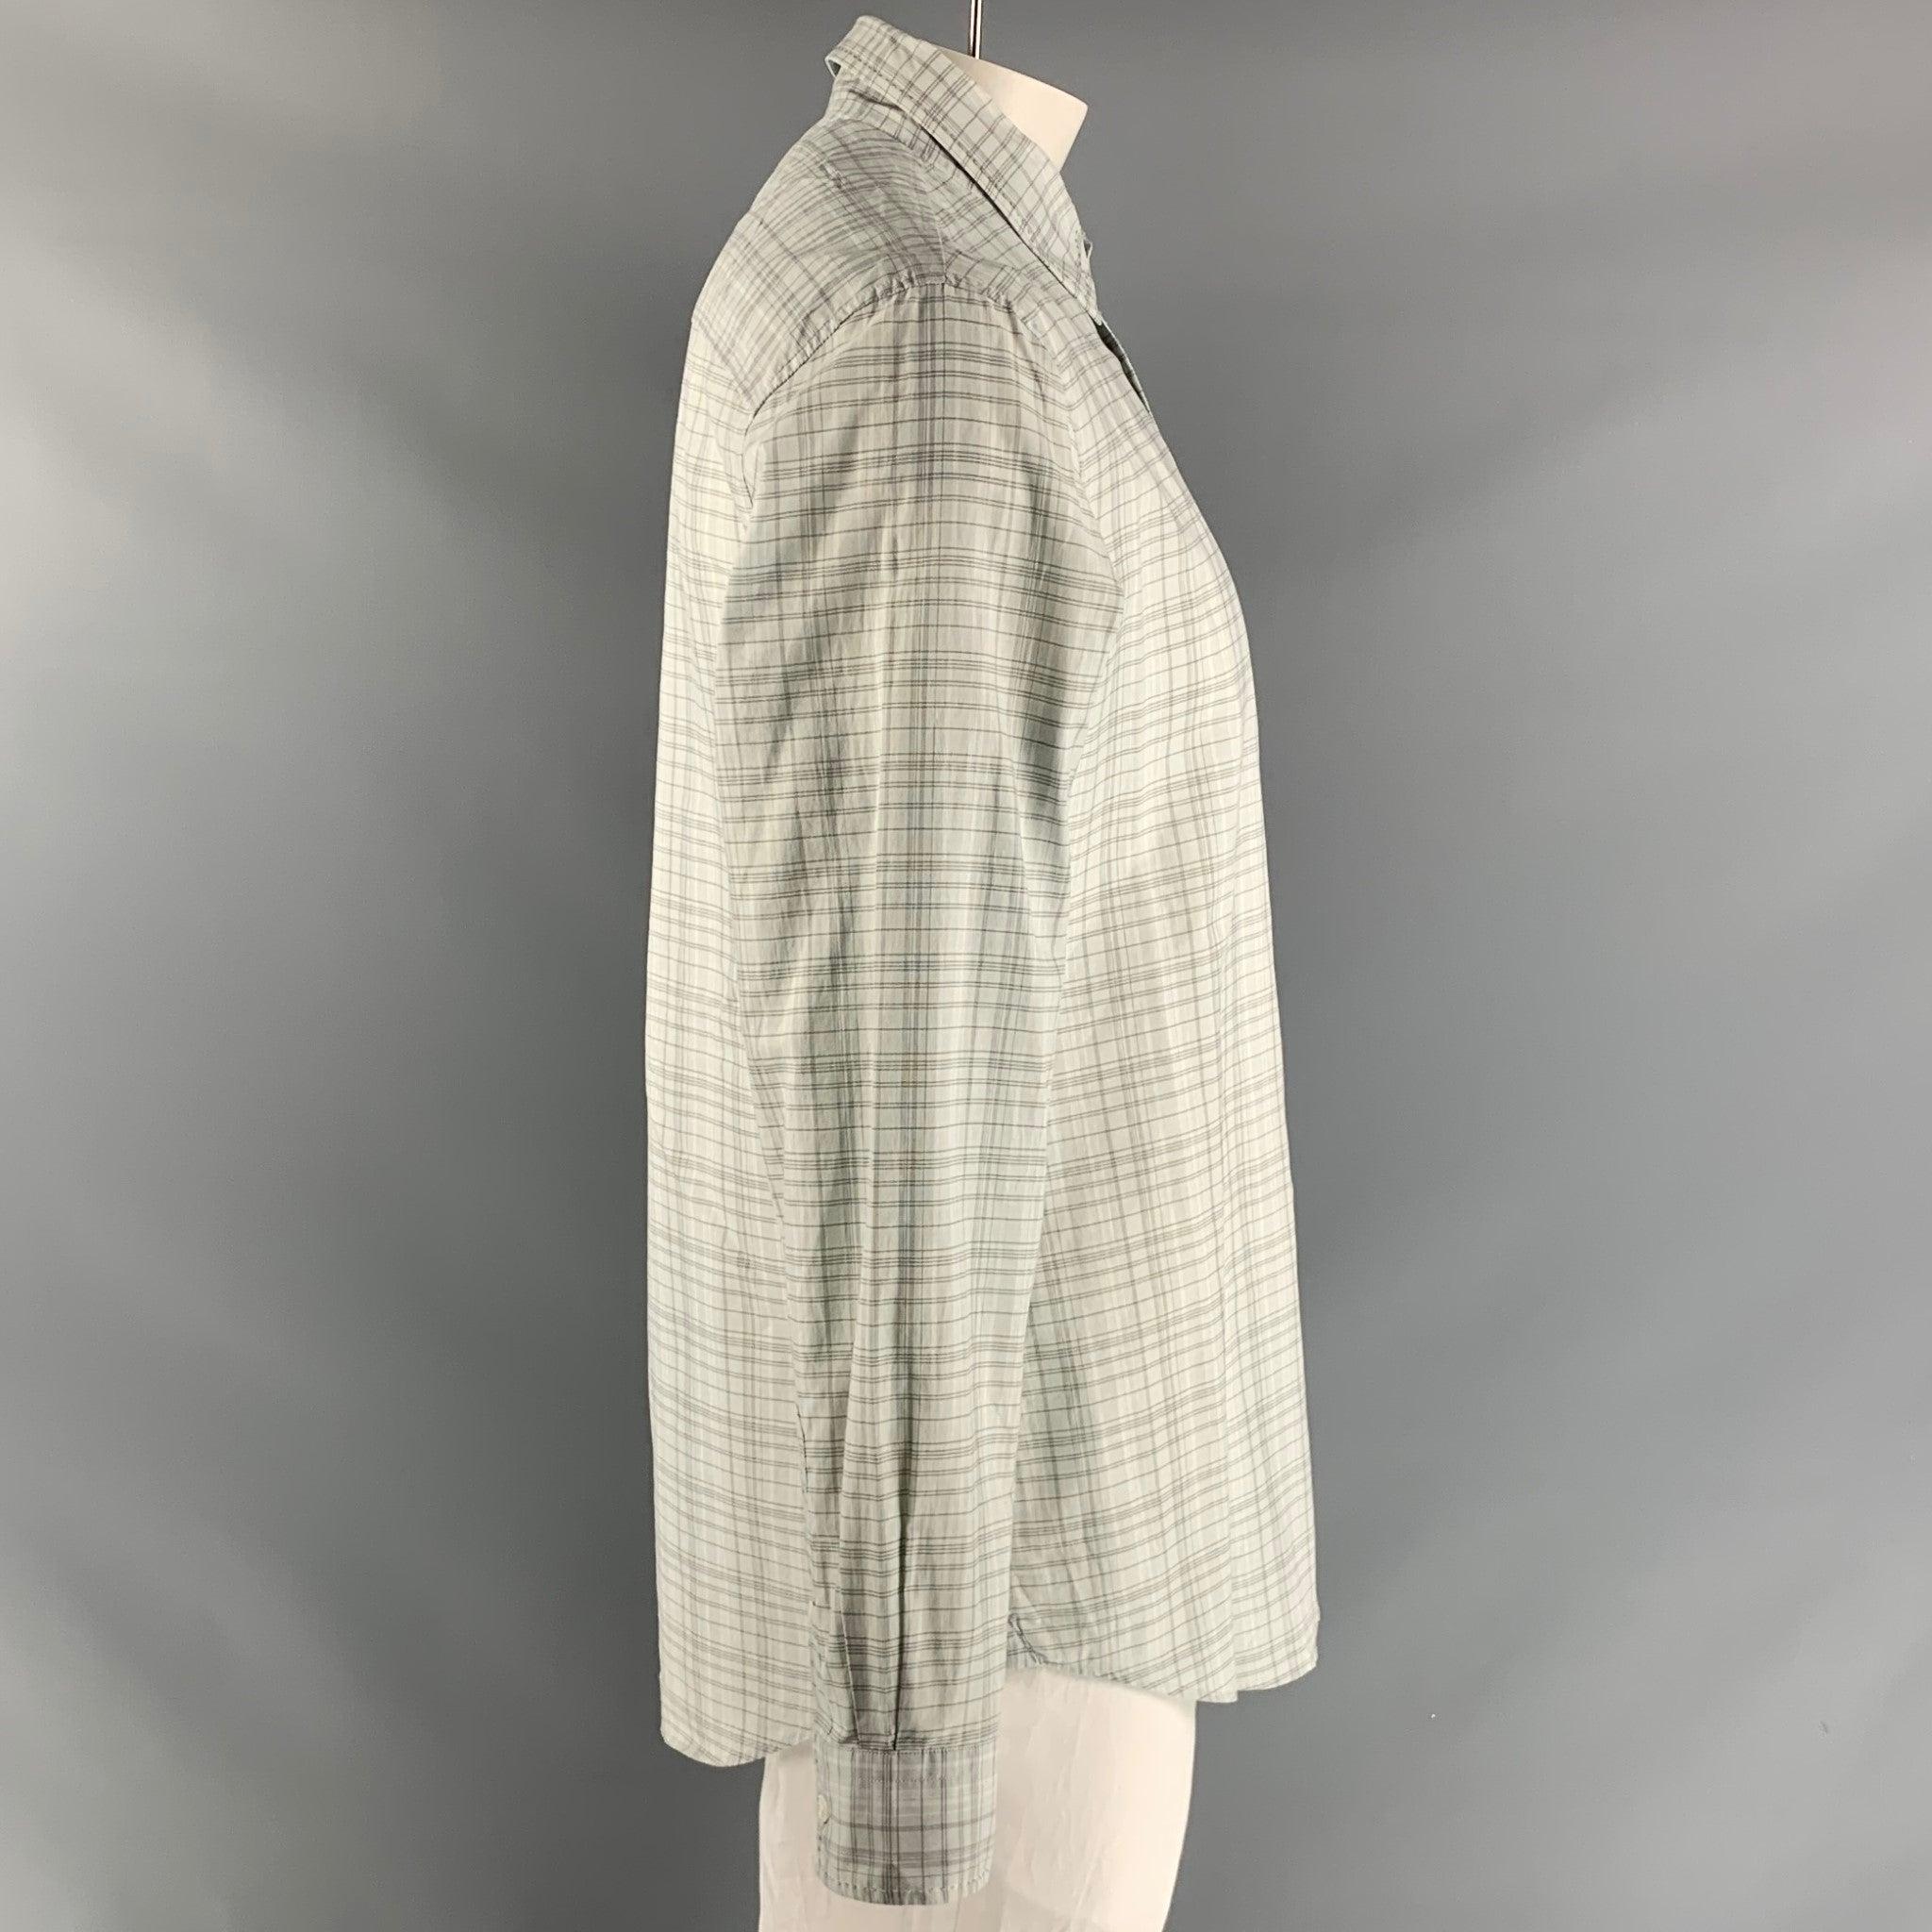 JOHN VARVATOS long sleeve shirt comes in grey plaid cotton featuring top stitch detail, straight collar, one button square cuff, and button up closure. Excellent Pre-Owned Condition.  

Marked:   L 

Measurements: 
 
Shoulder: 20 inches Chest: 46